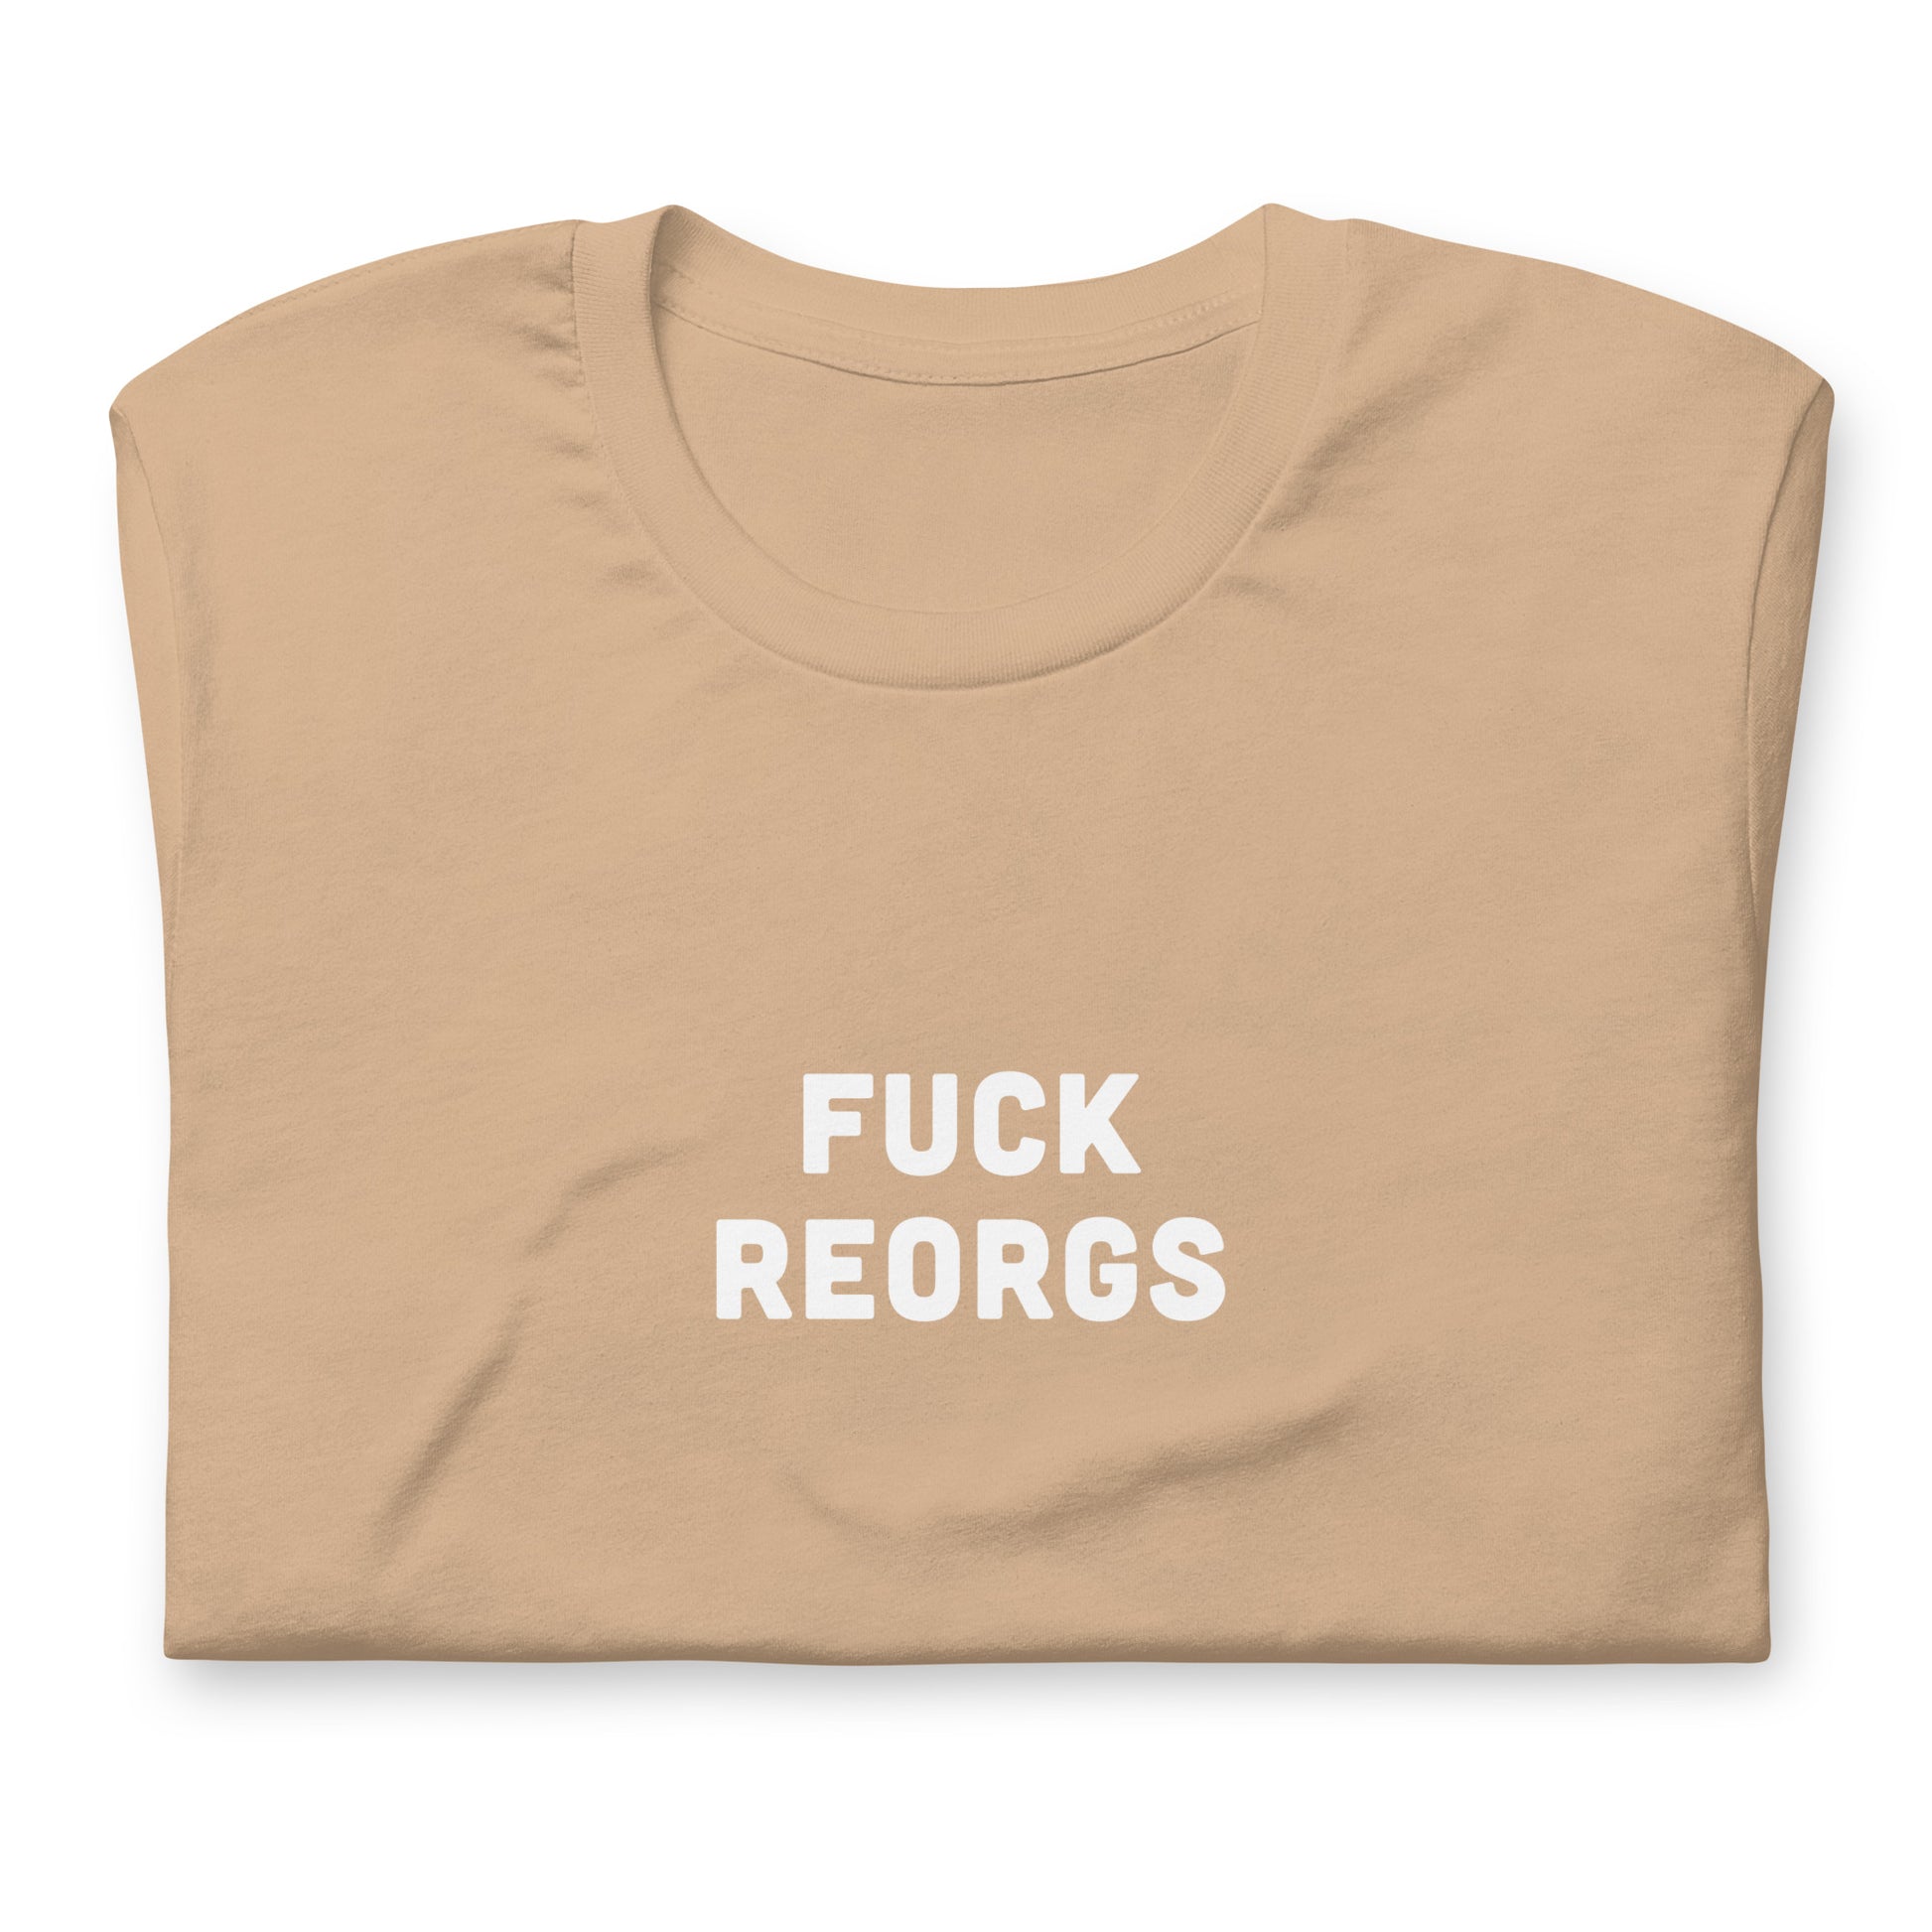 Fuck Reorgs T-Shirt Size 2XL Color Forest